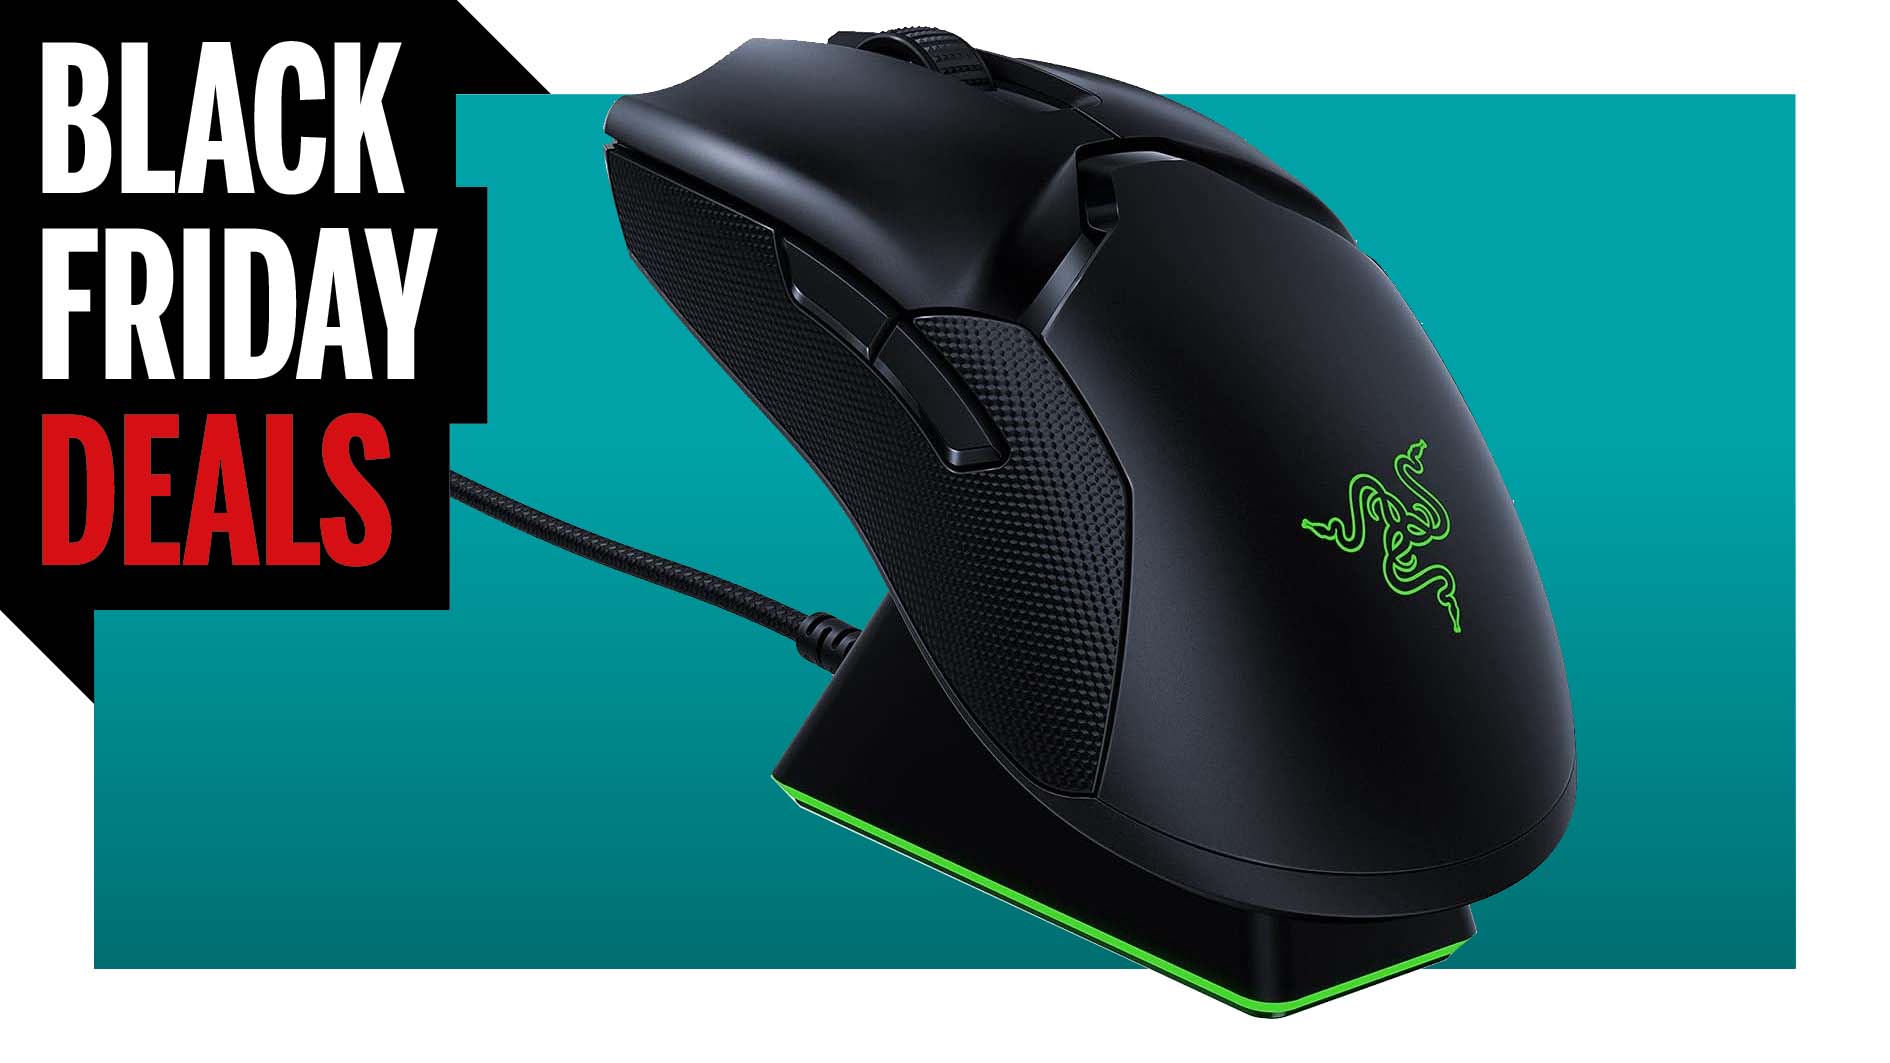  This Razer Viper Ultimate wireless mouse absolutely slaps at £63 